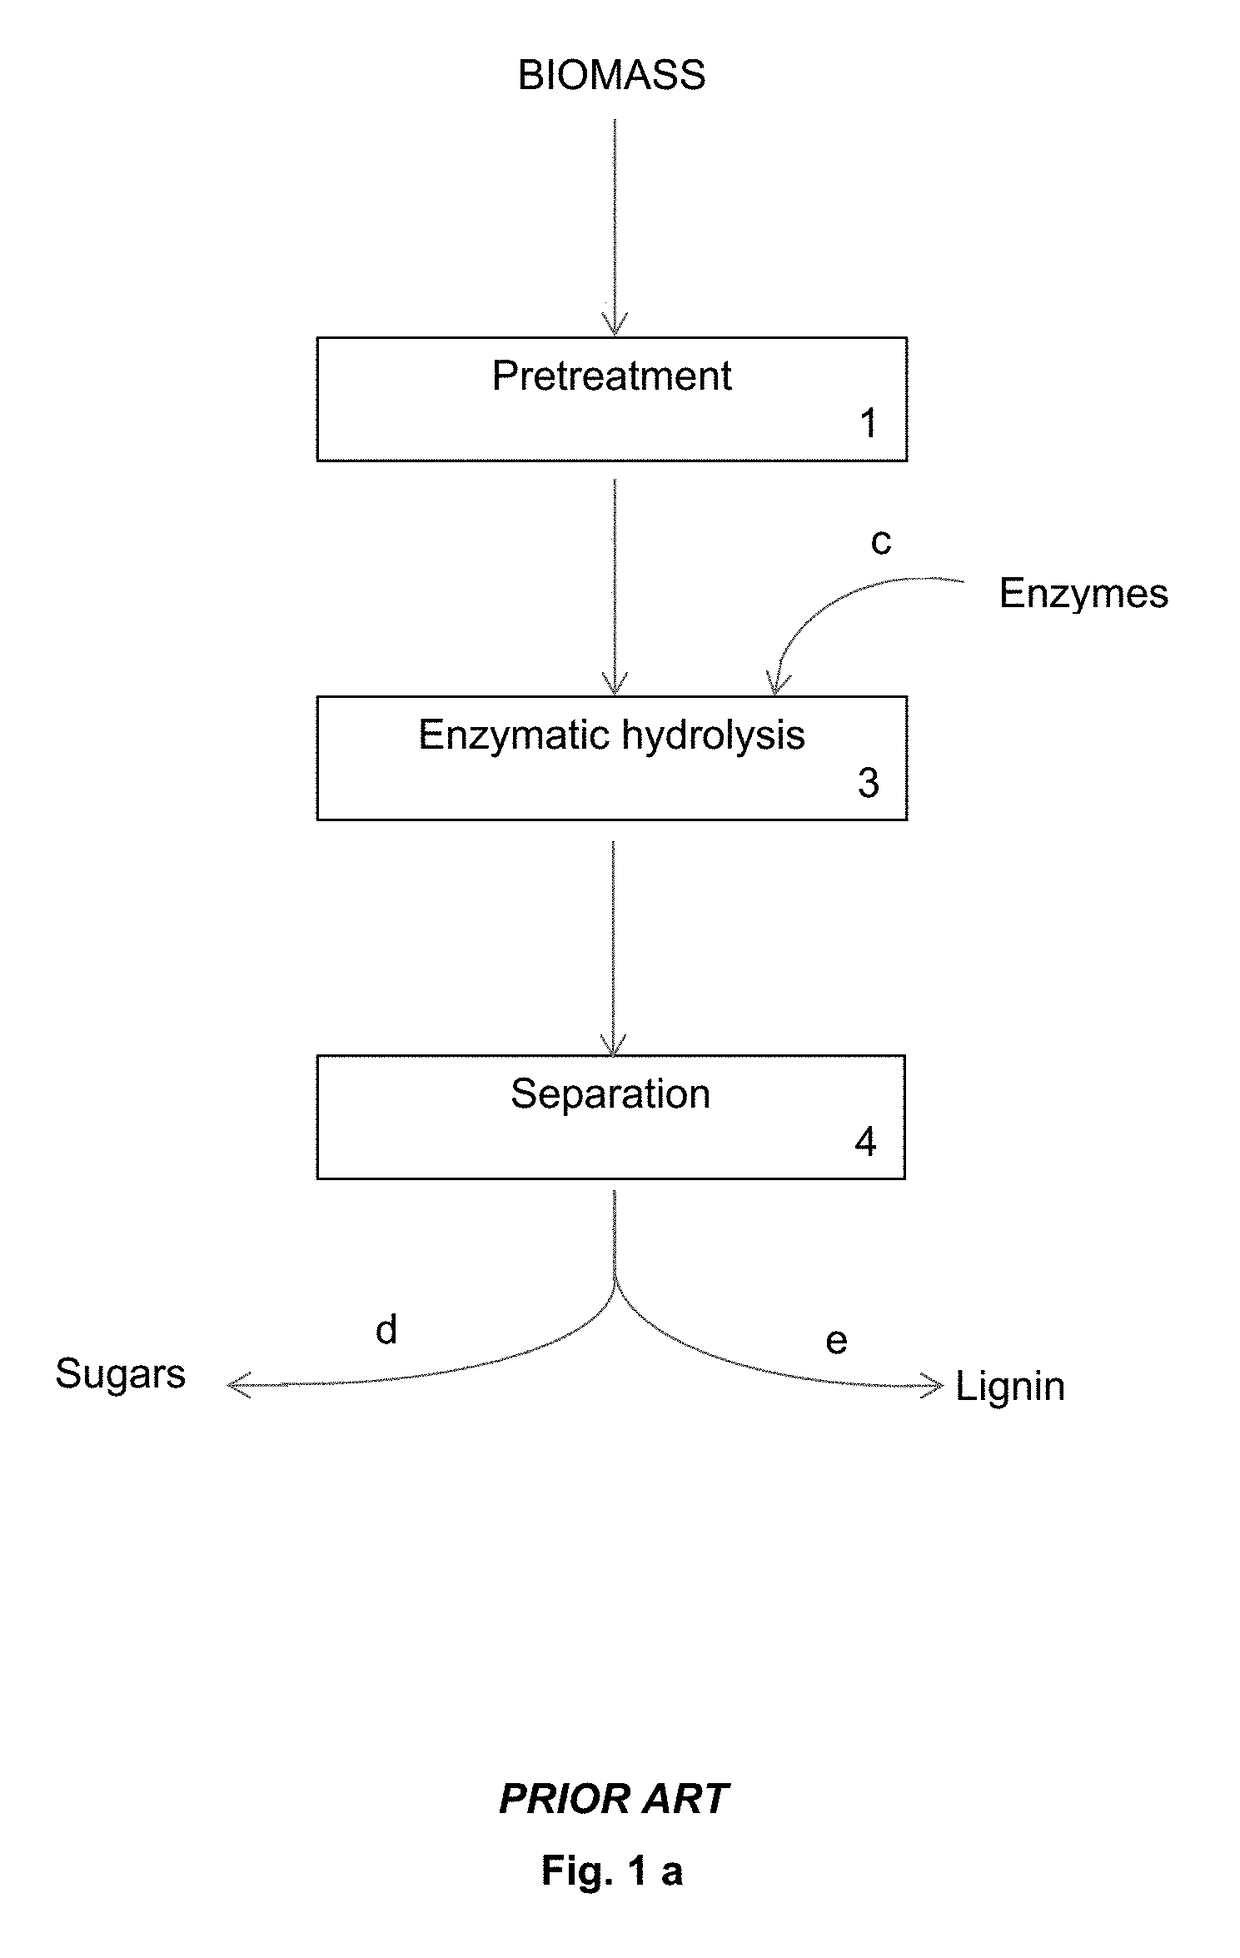 Post-treatment to enhance the enzymatic hydrolysis of pretreated lignocellulosic biomass